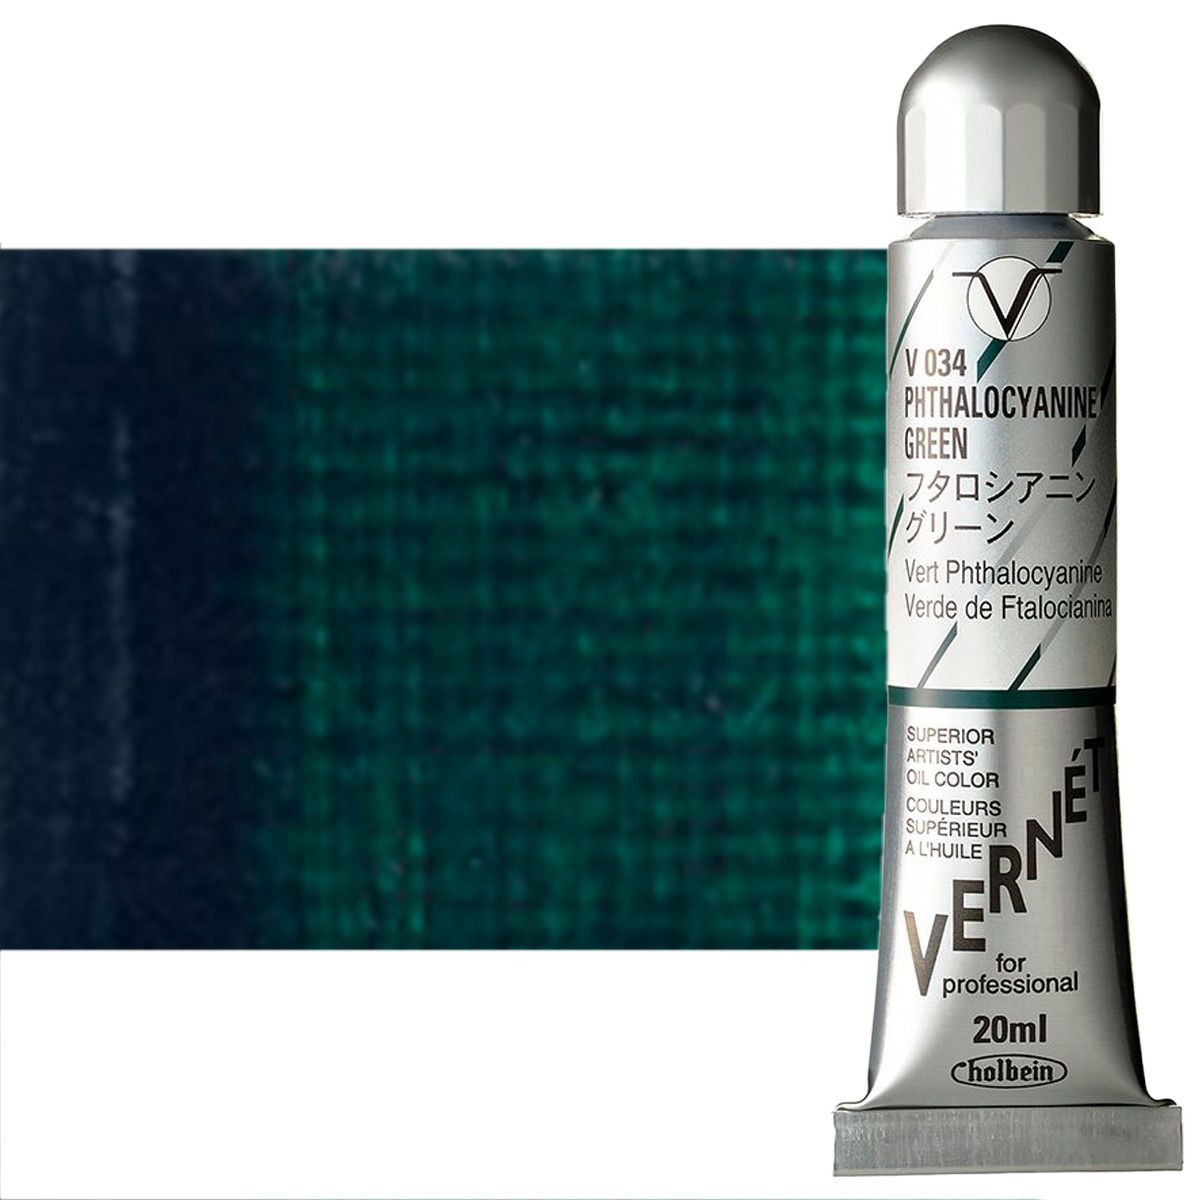 Holbein Vern?t Oil Color 20 ml Tube - Phthalocyanine Green